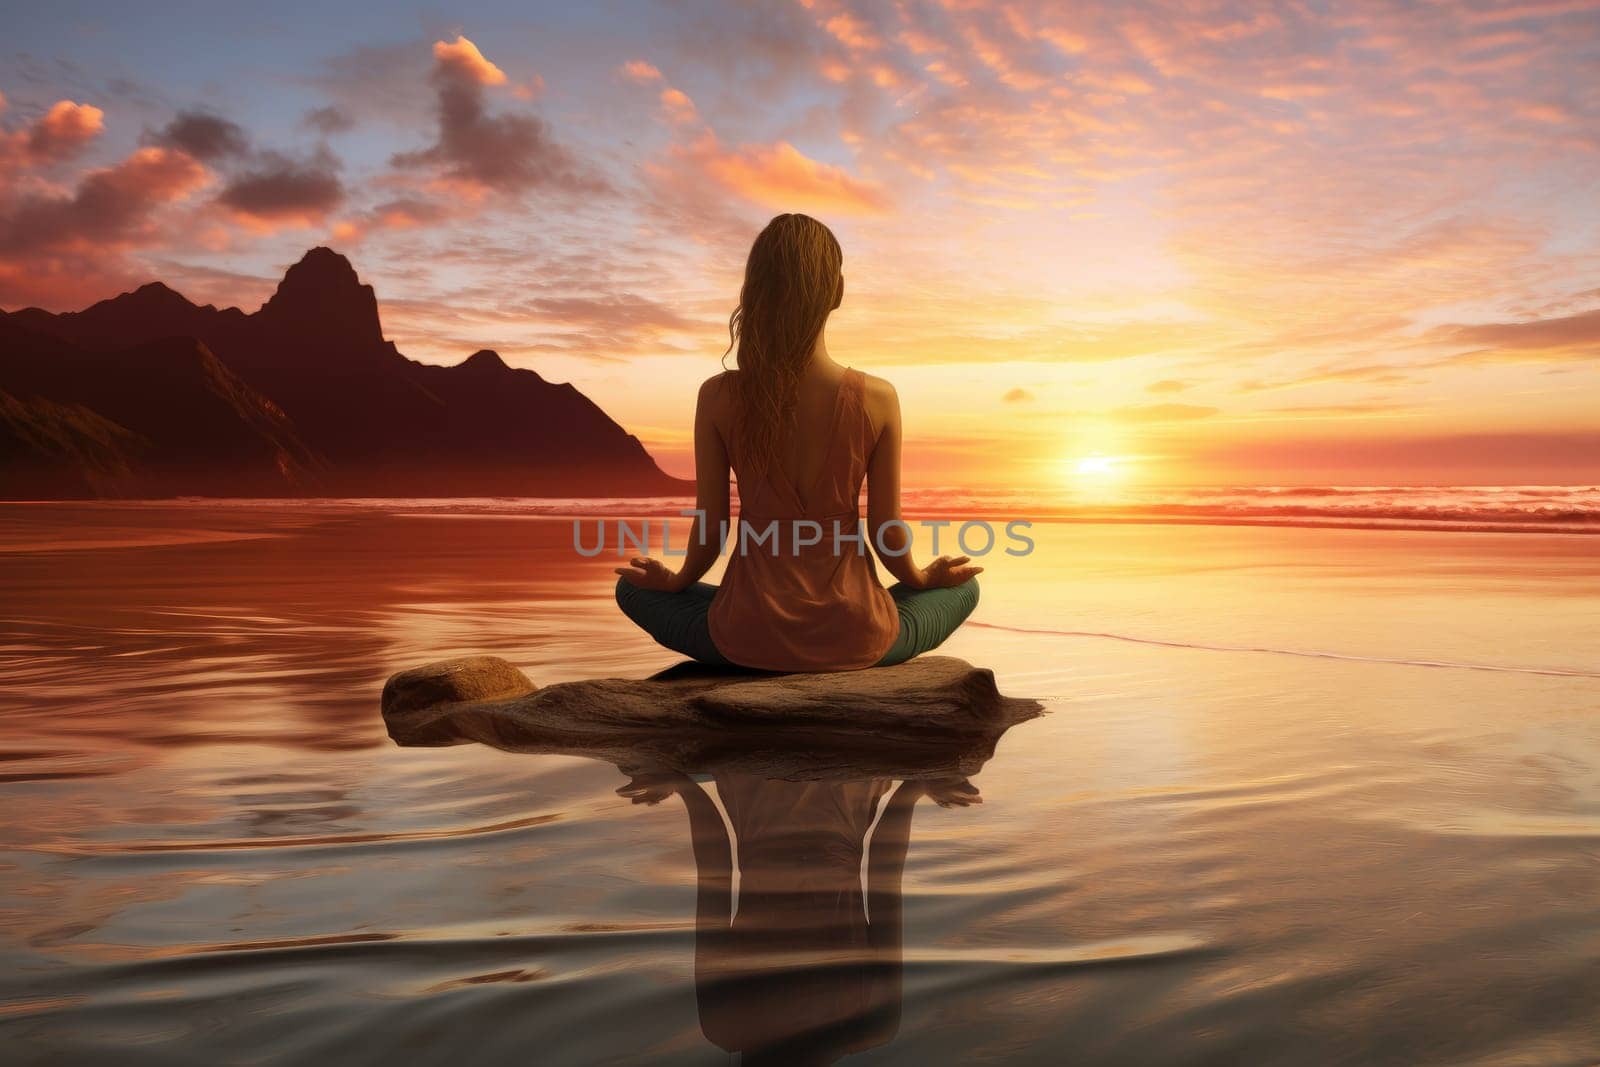 Silhouette of a person practicing yoga at sunset, creating a calm and serene atmosphere for meditation. The vibrant colors of the sky add to the peaceful ambiance.